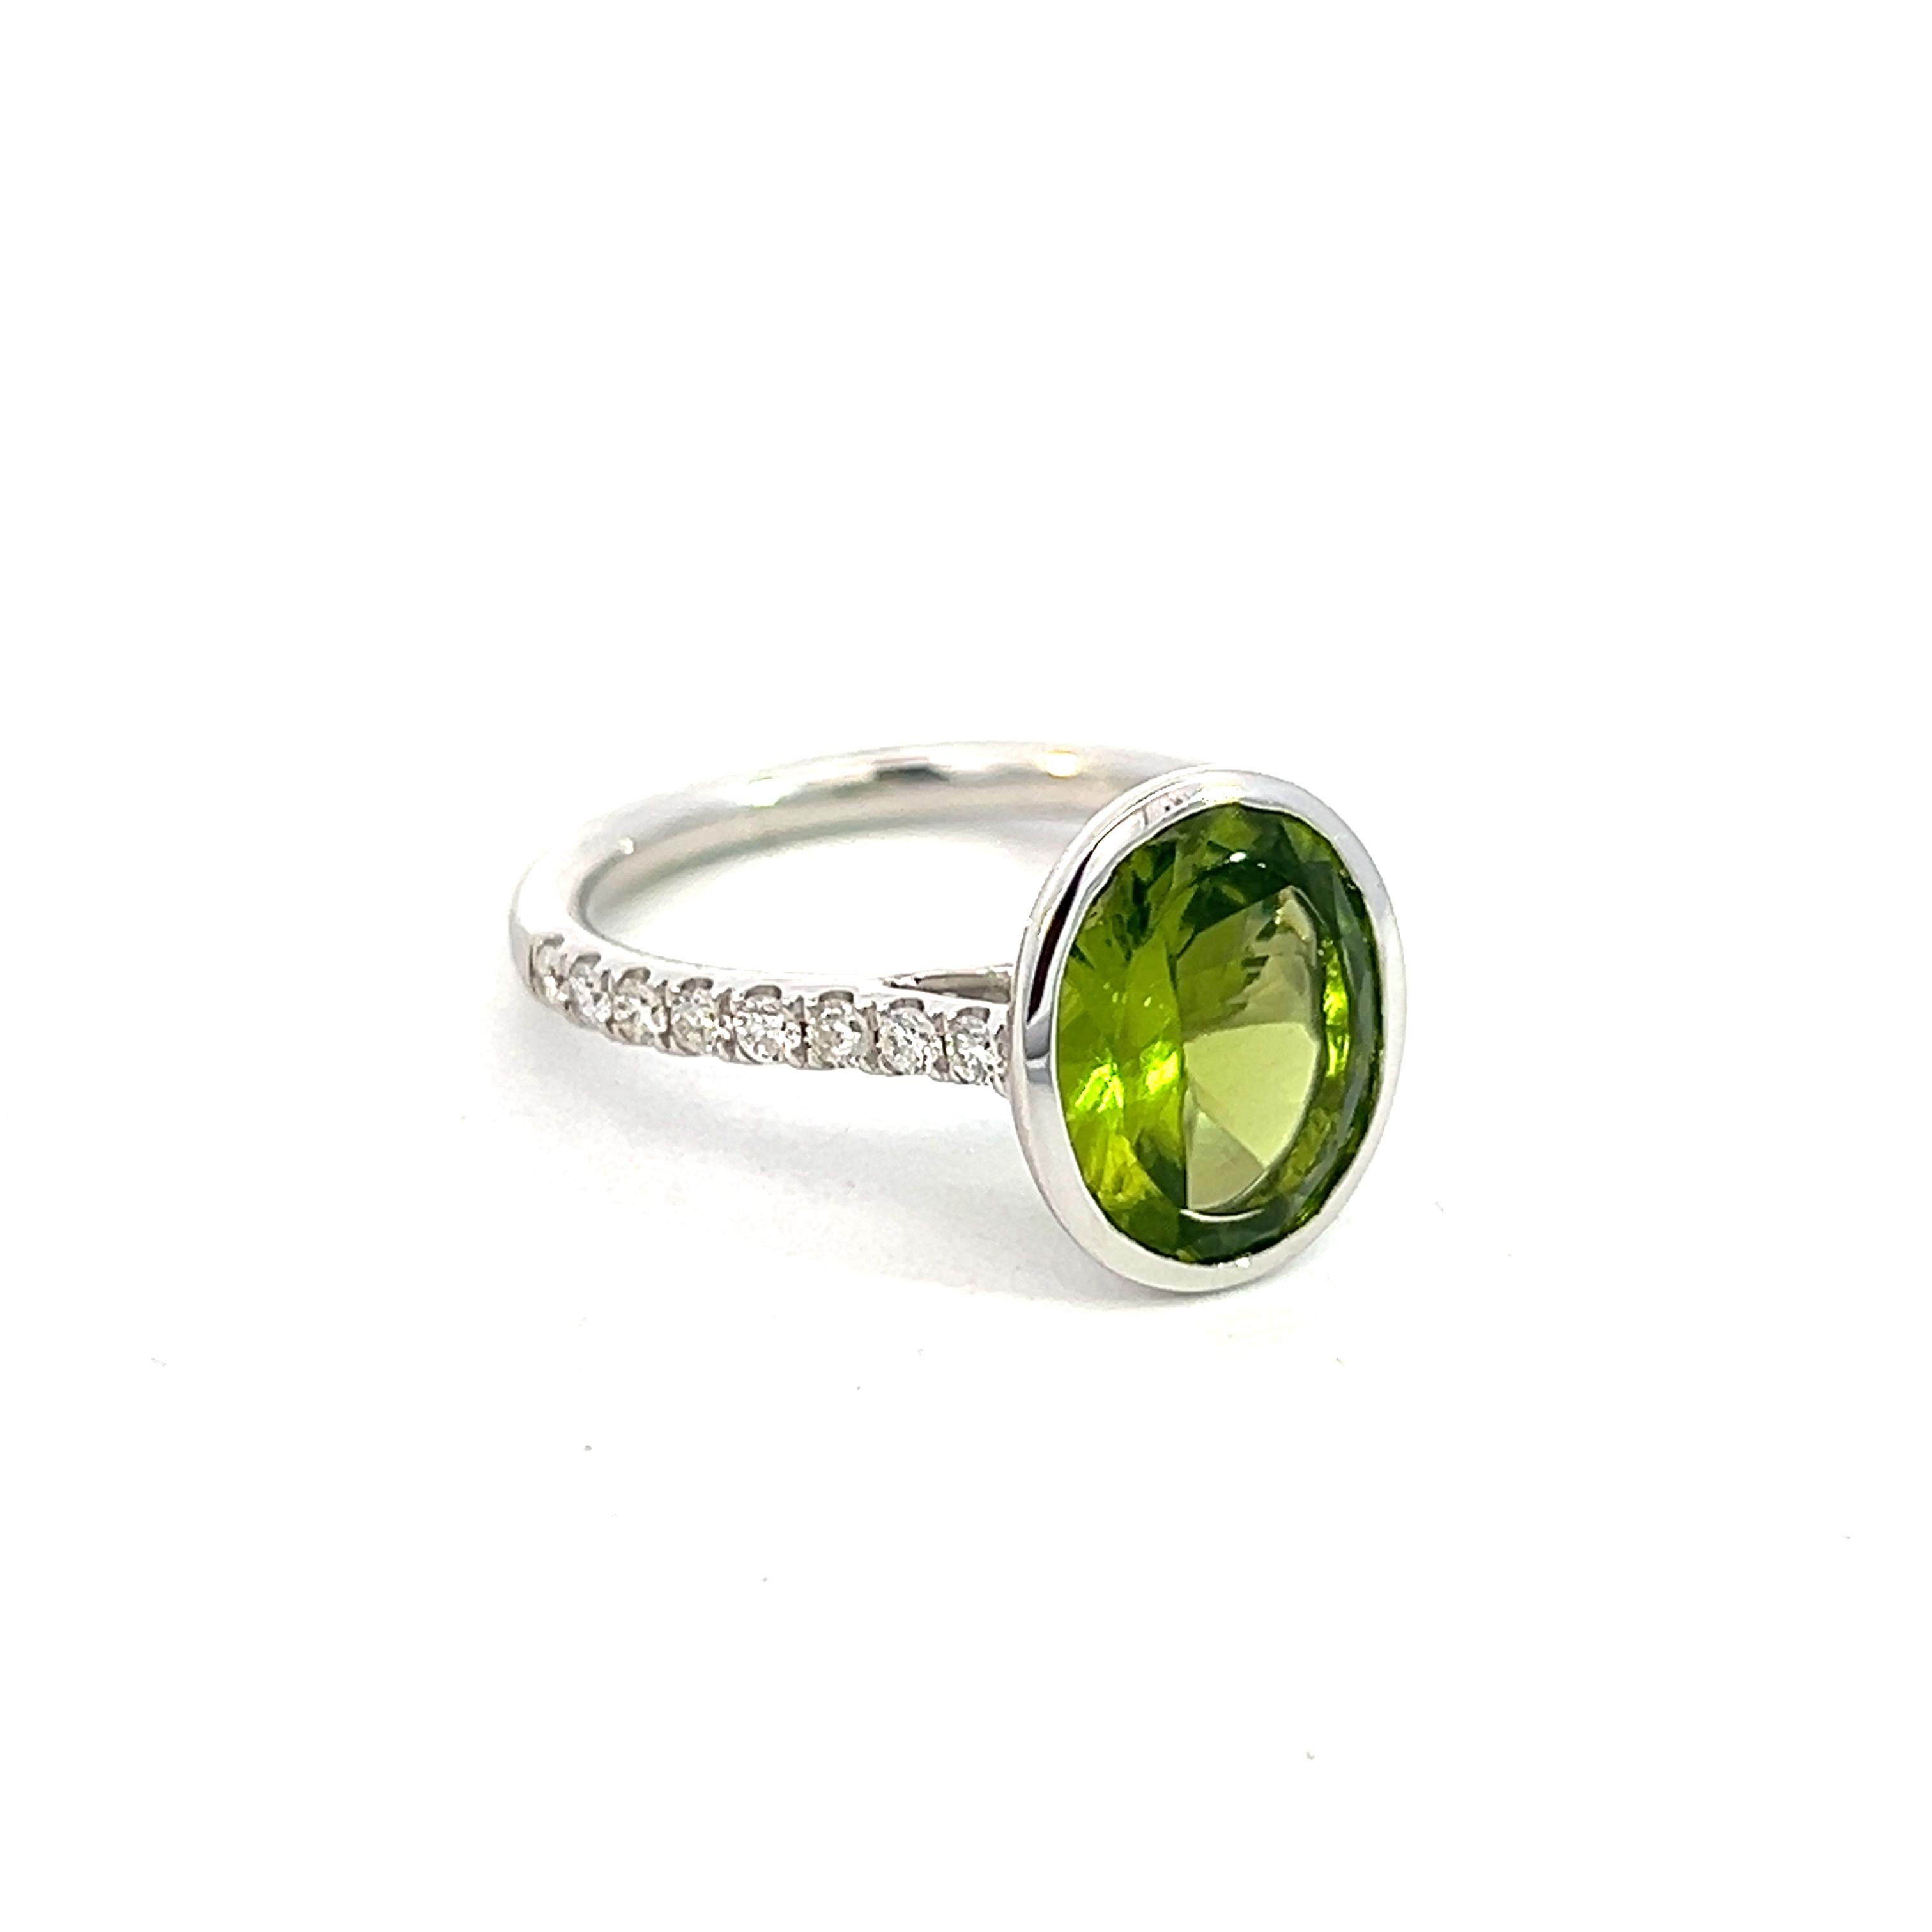 Natural Peridot Diamond Ring 6.5 14k W Gold 3.49 TCW Certified In New Condition For Sale In Brooklyn, NY